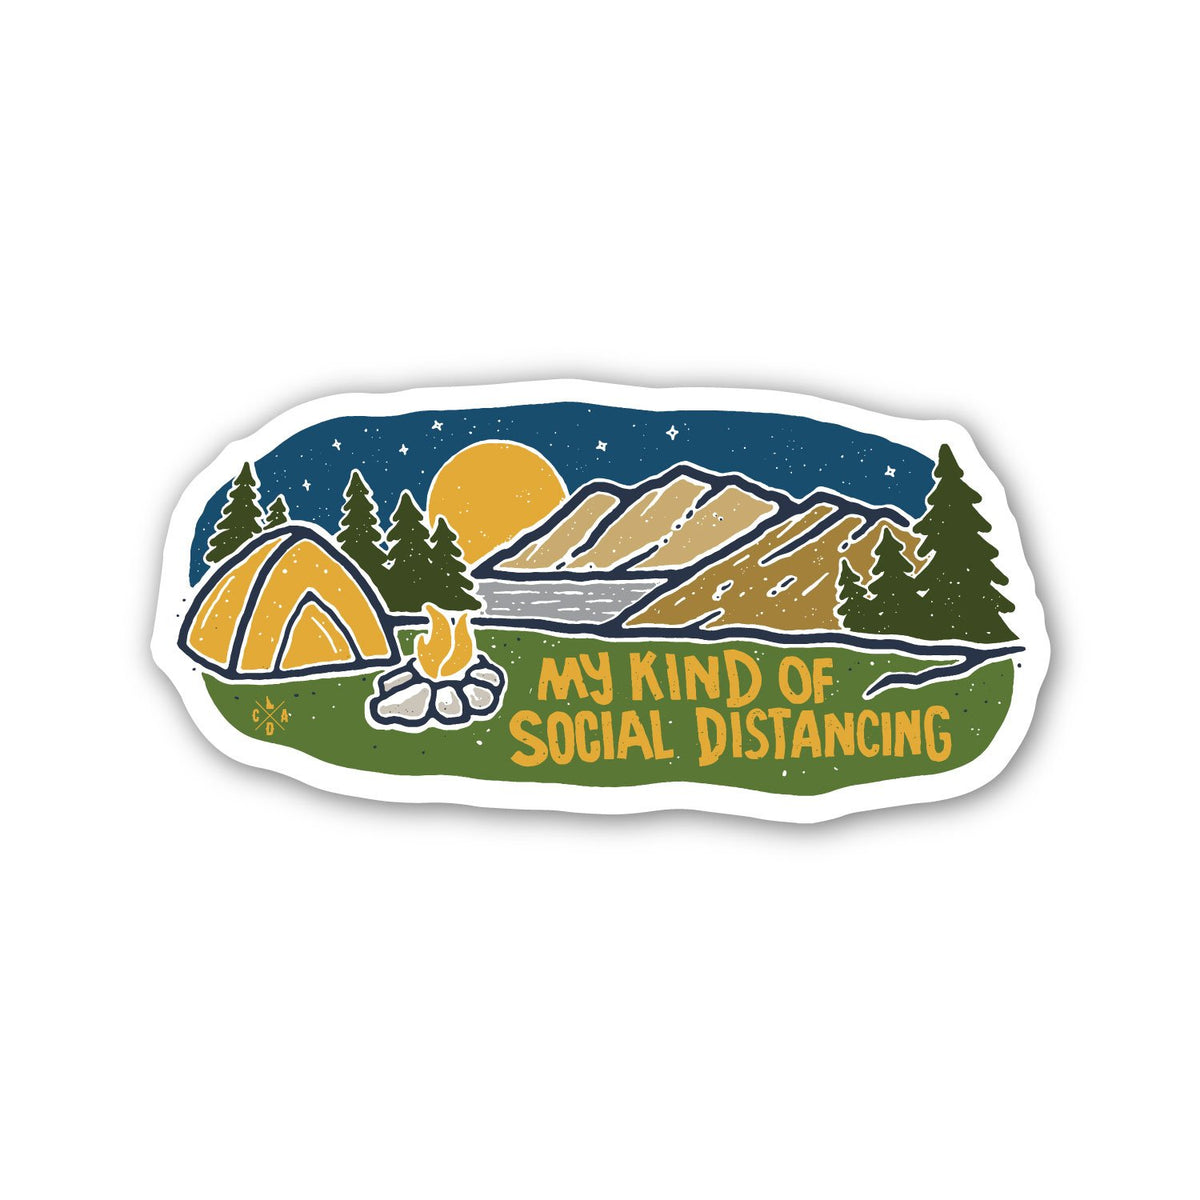 My Kind of Social Distancing Sticker